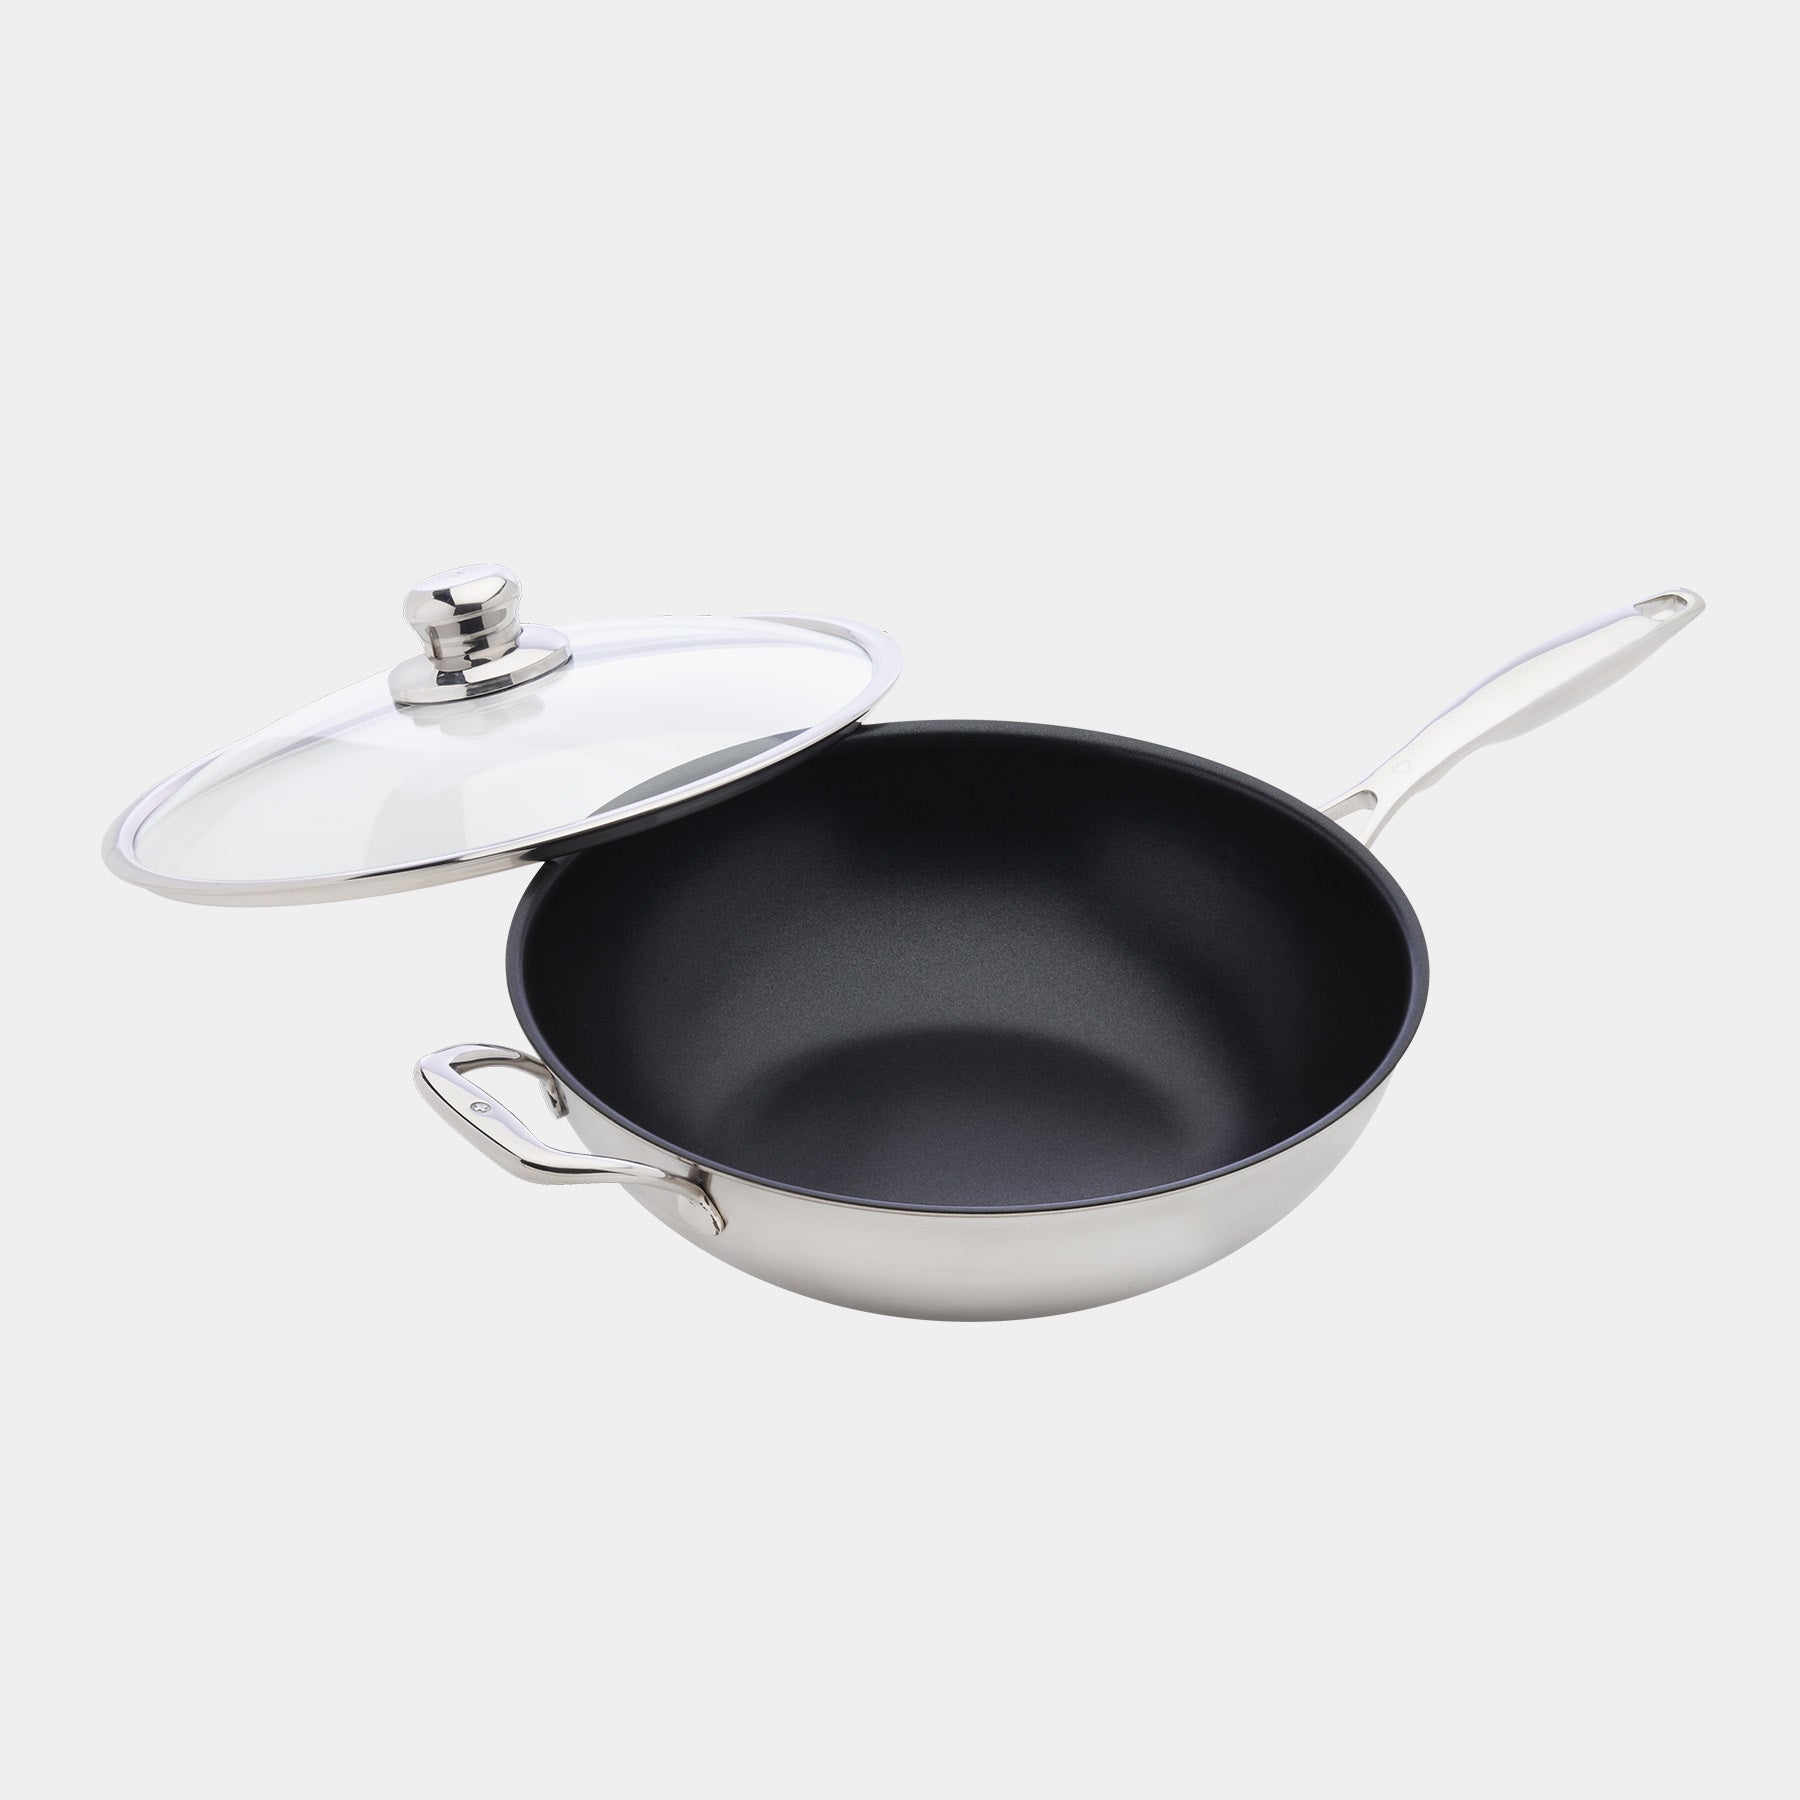 Nonstick Clad 12.5" Wok with Glass Lid - Induction